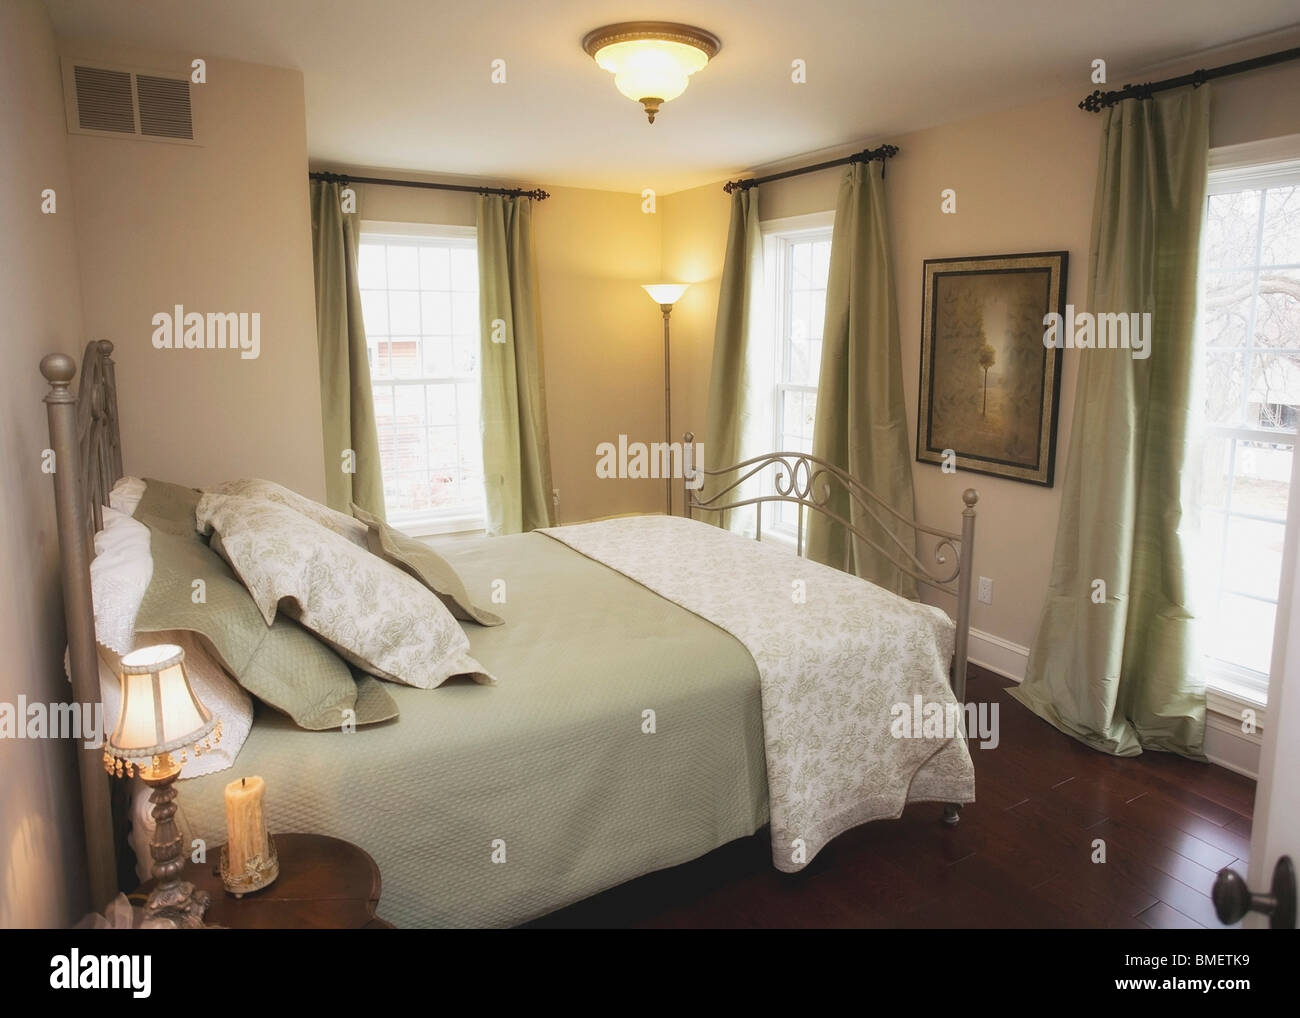 A Bedroom With Large Windows Stock Photo